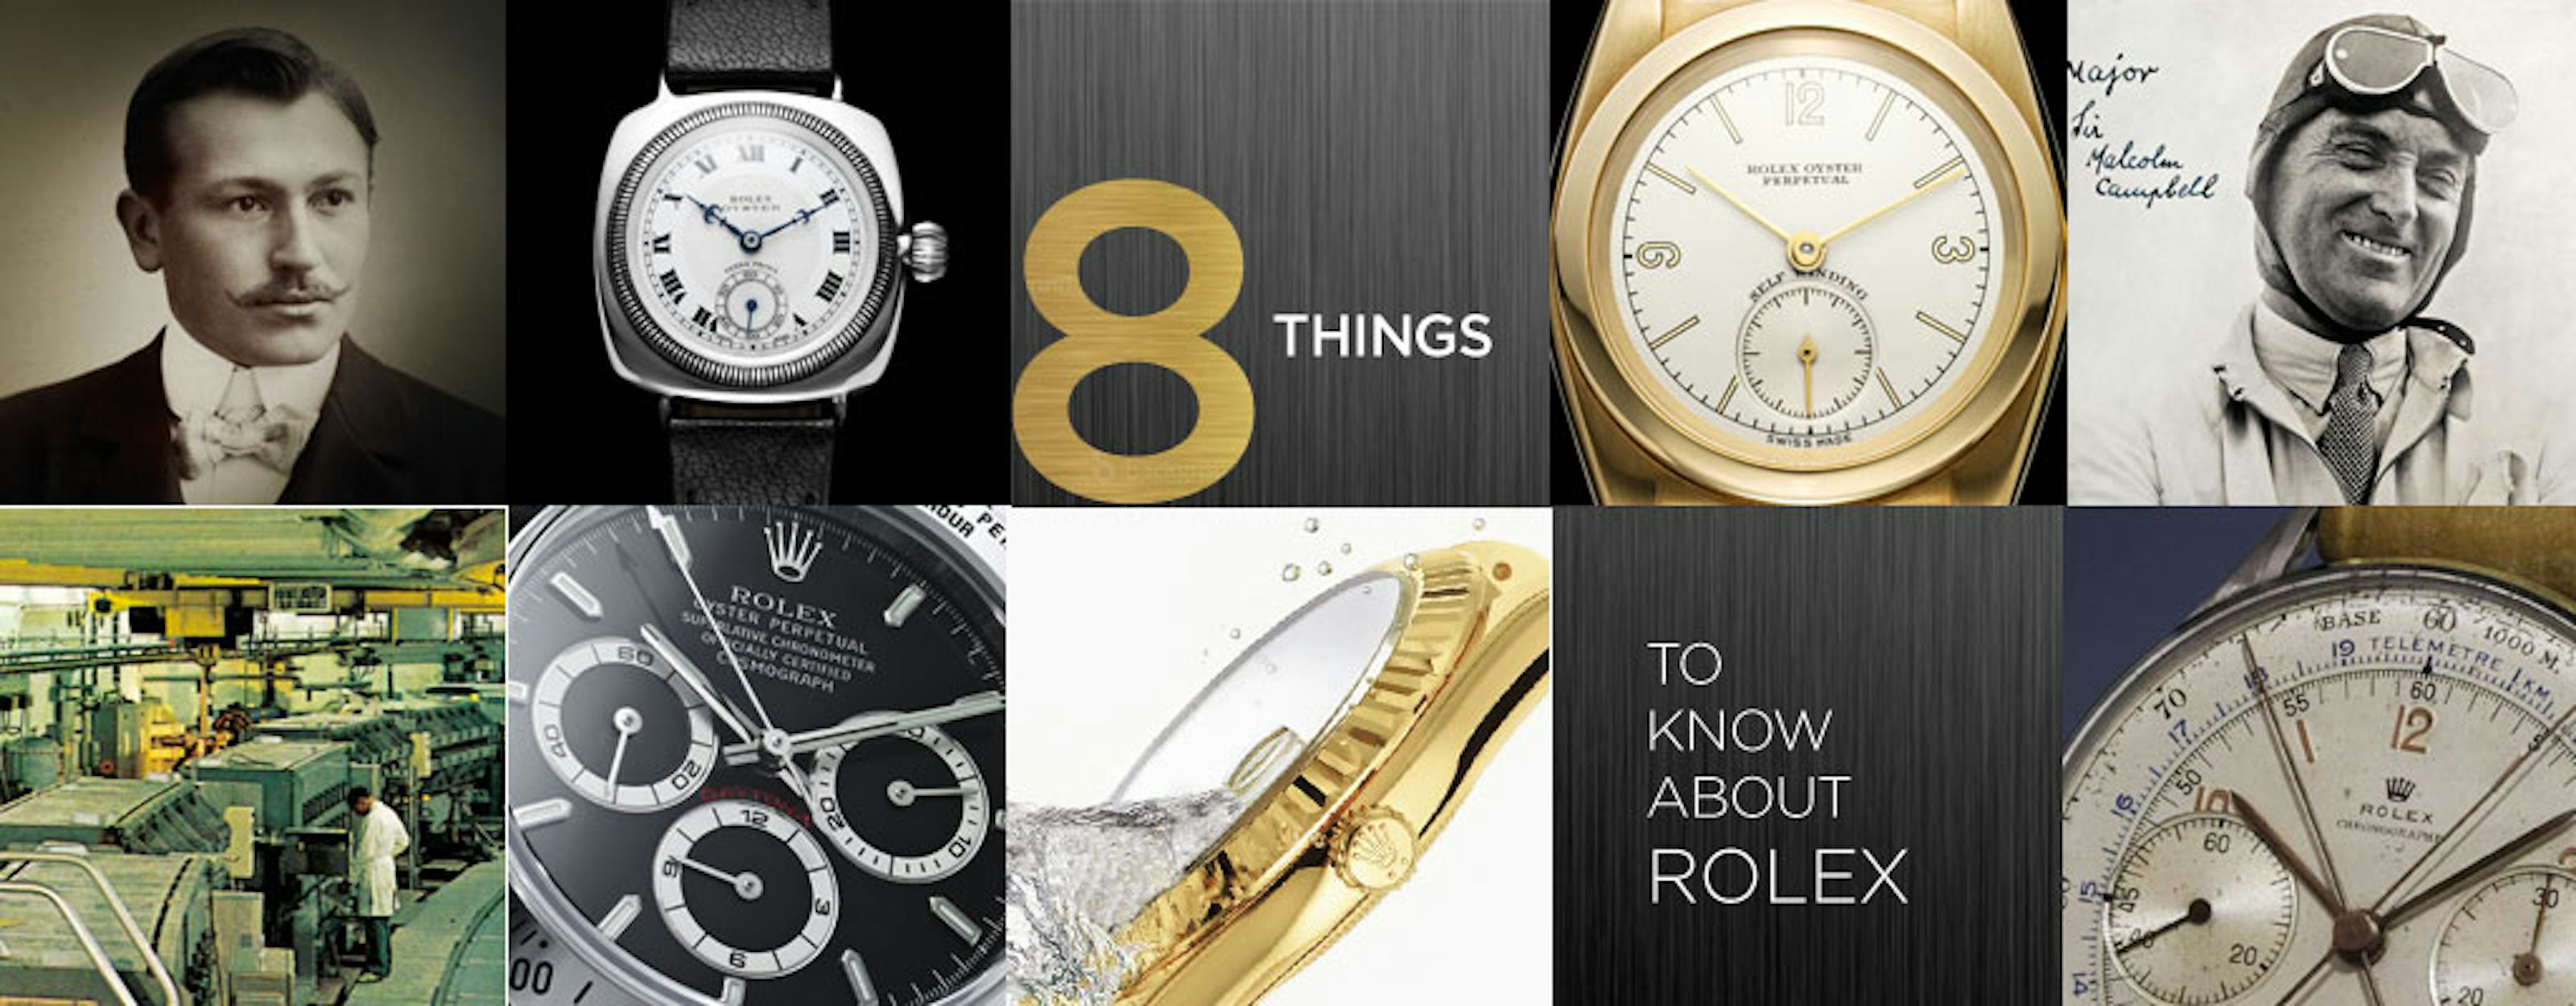 8 Things to Know About Rolex